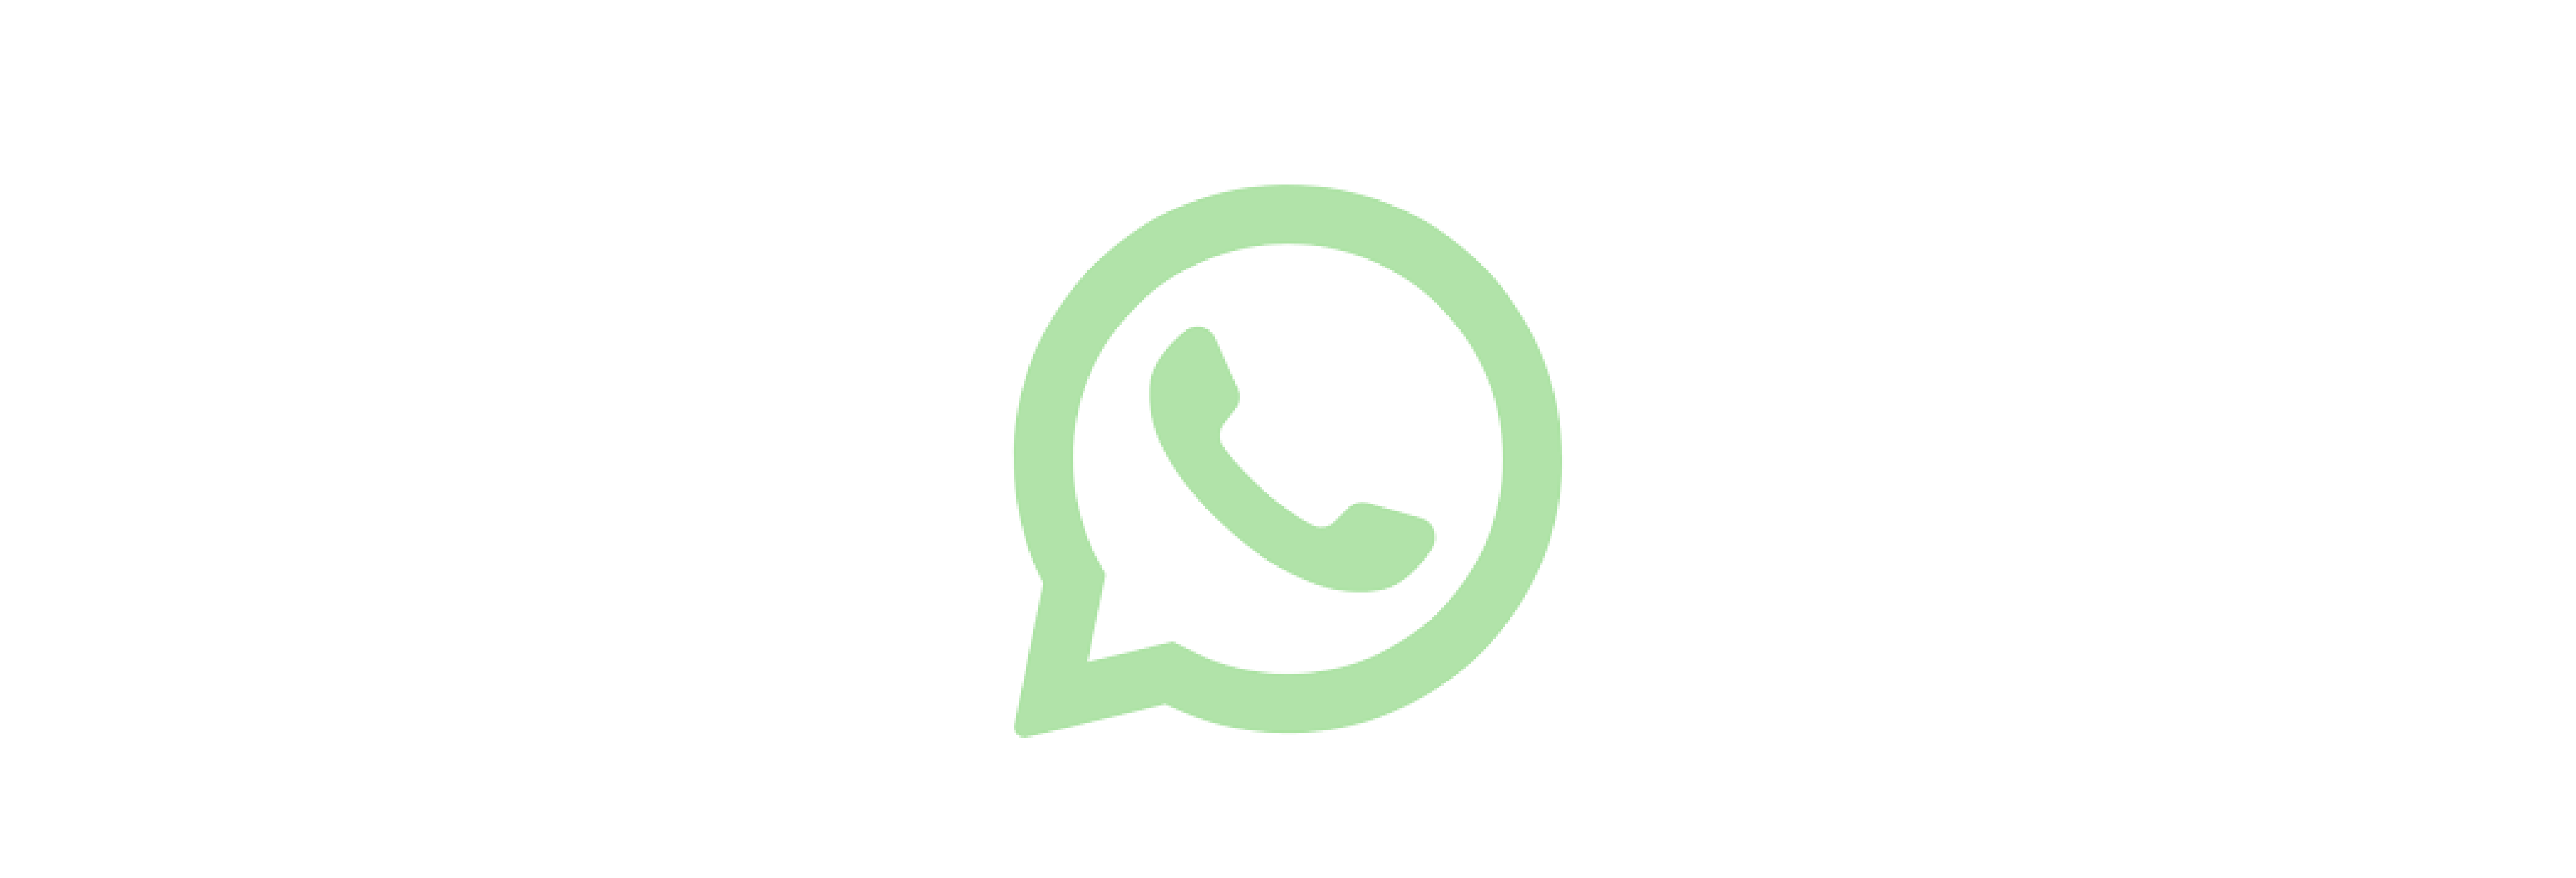 How to back up your messages and media from WhatsApp on iPhone